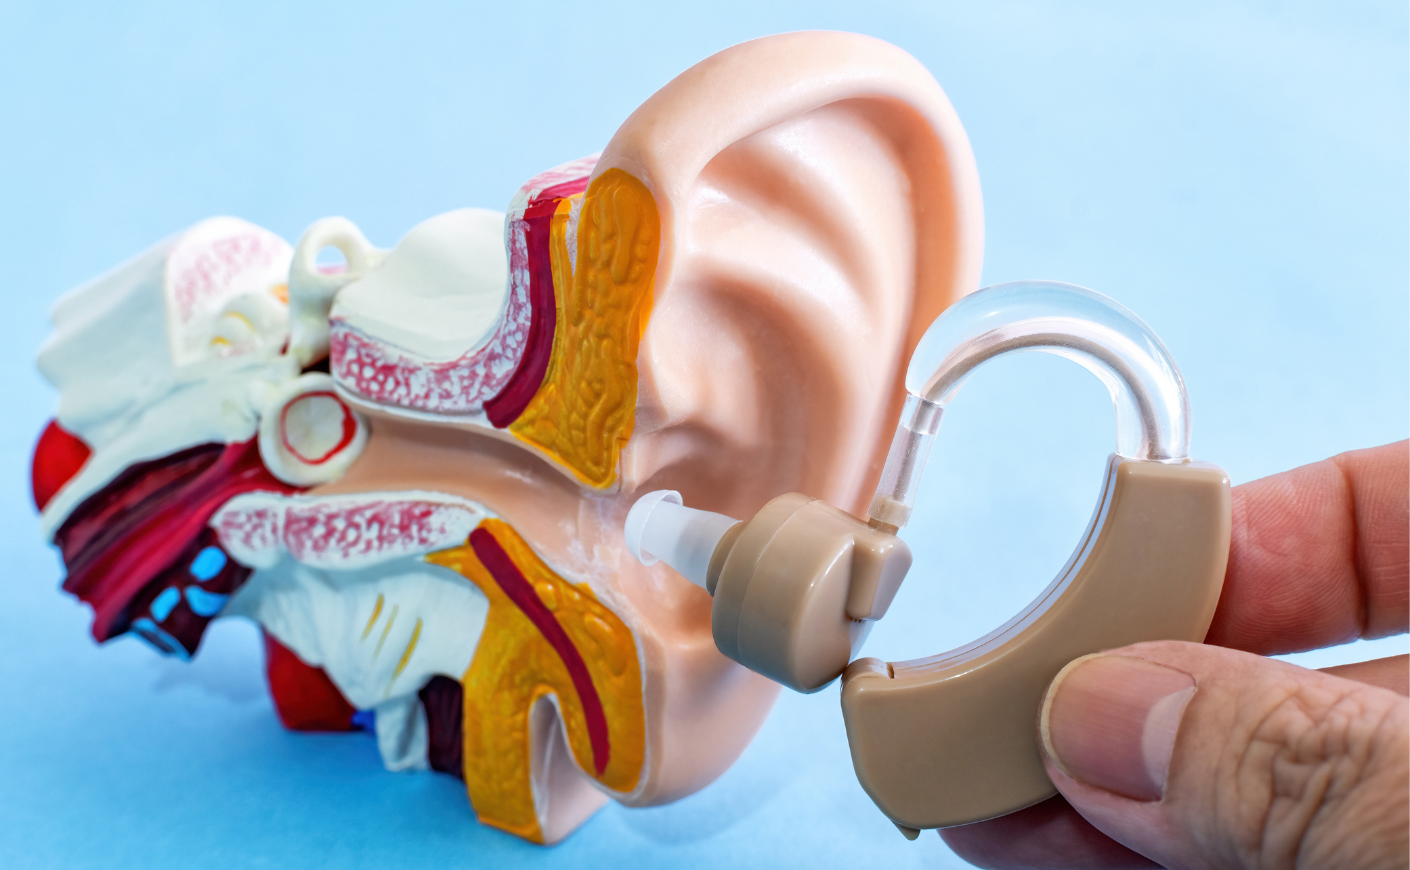 A hearing aid being placed into a model of an ear